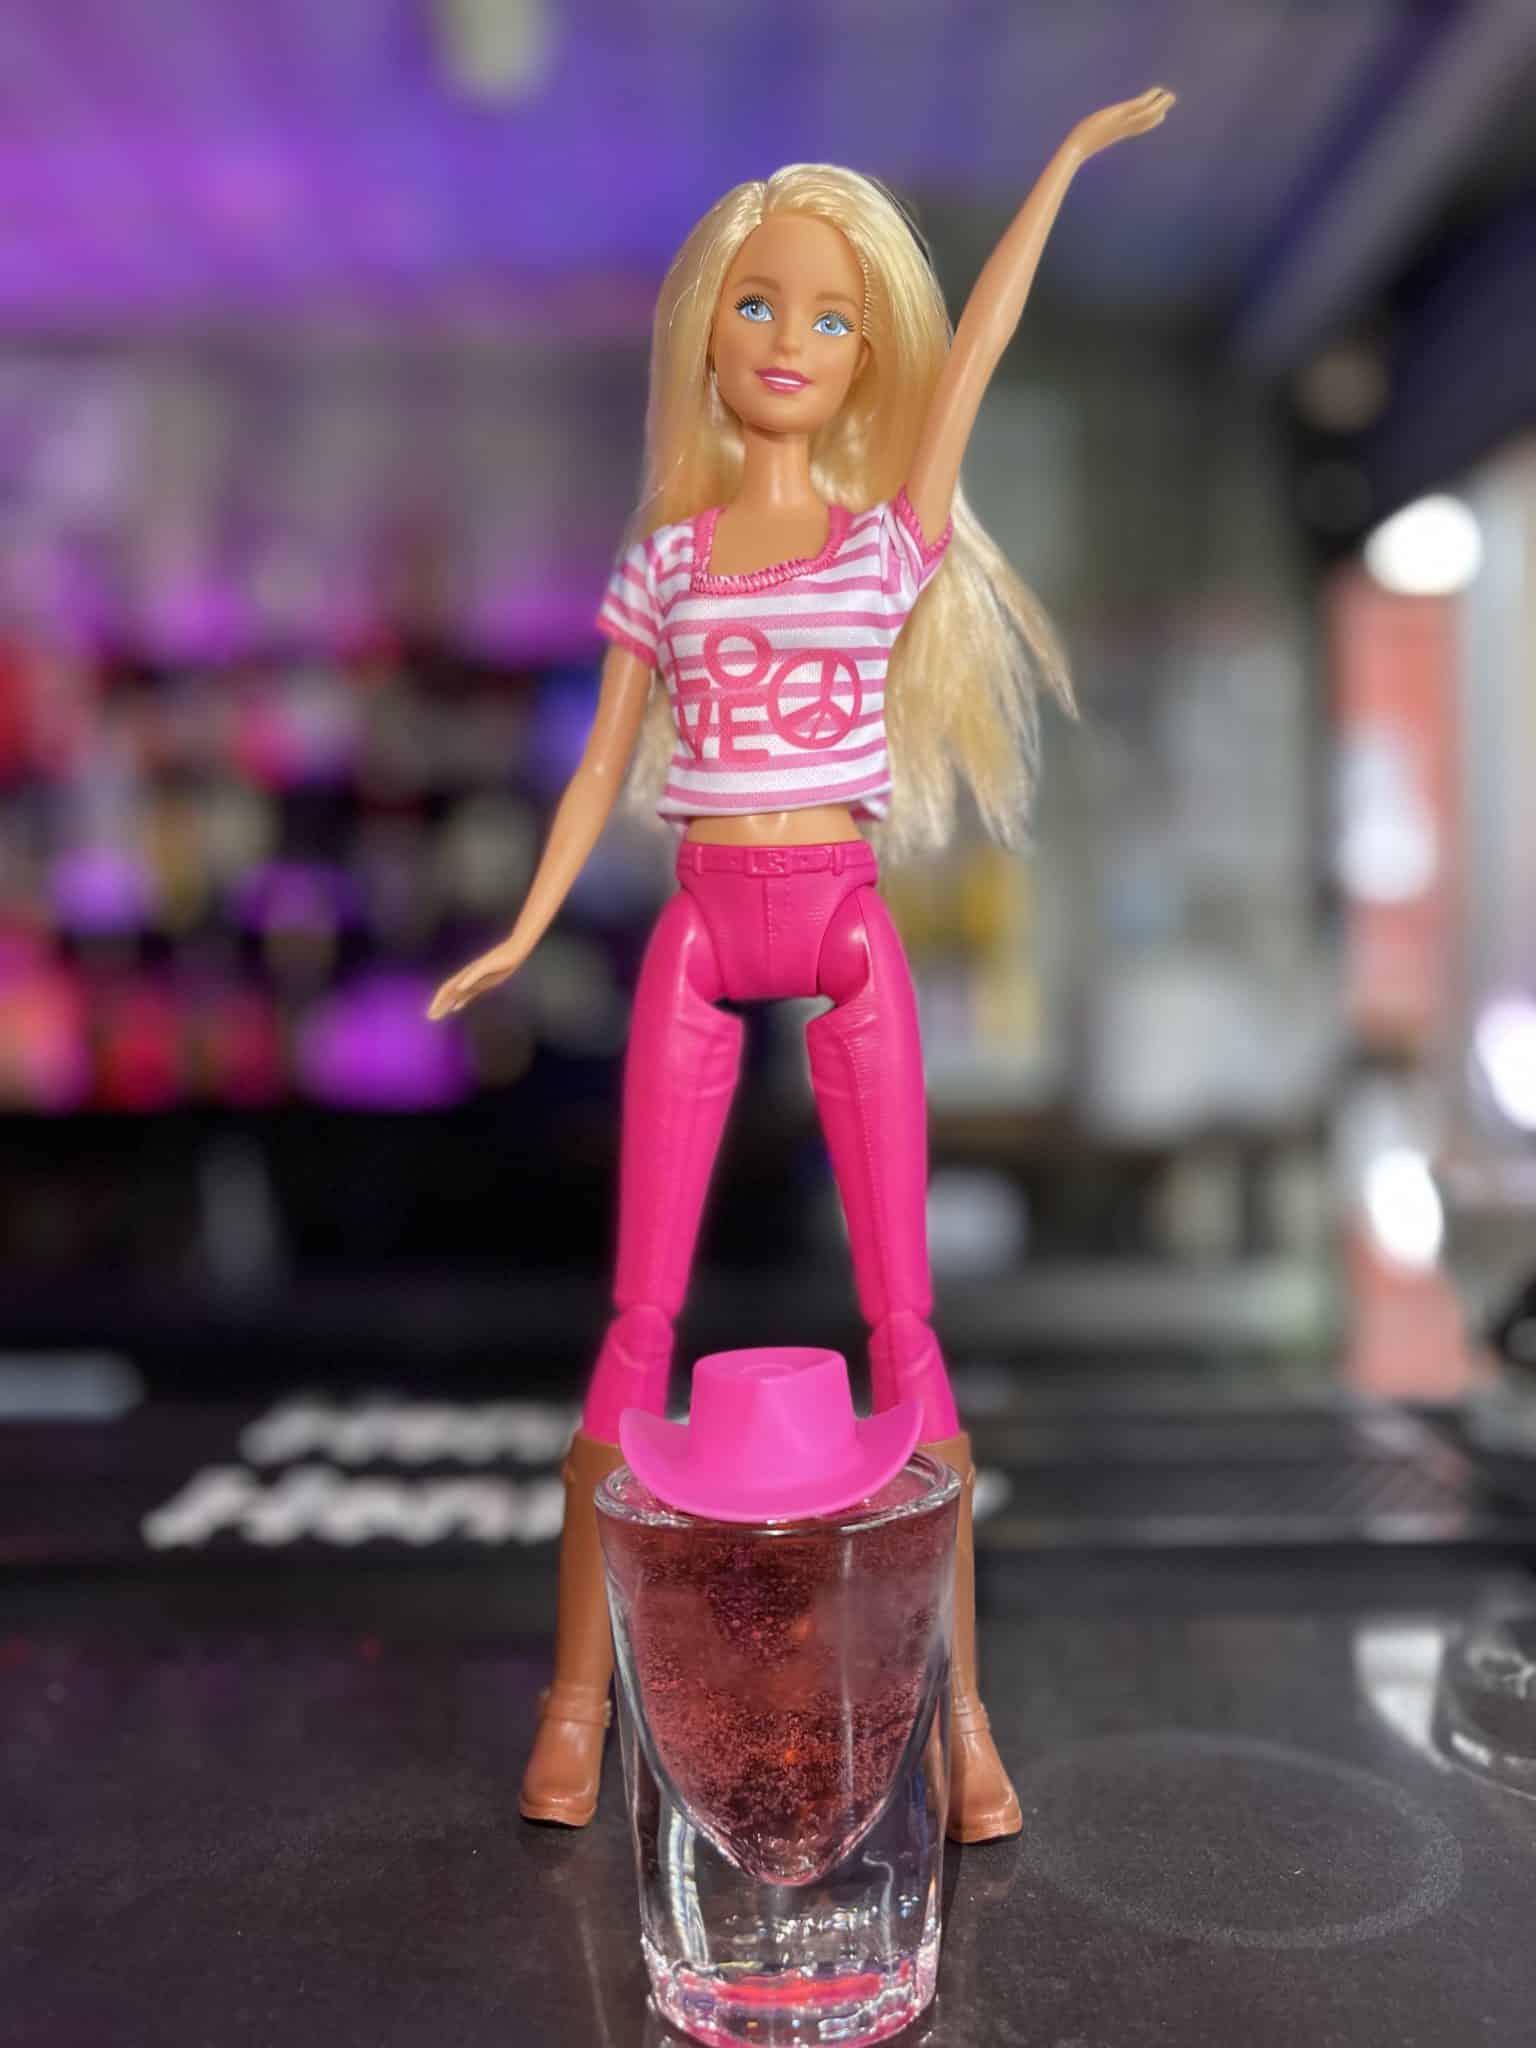 Barbie Meets the Wild West at SHOTS Bar